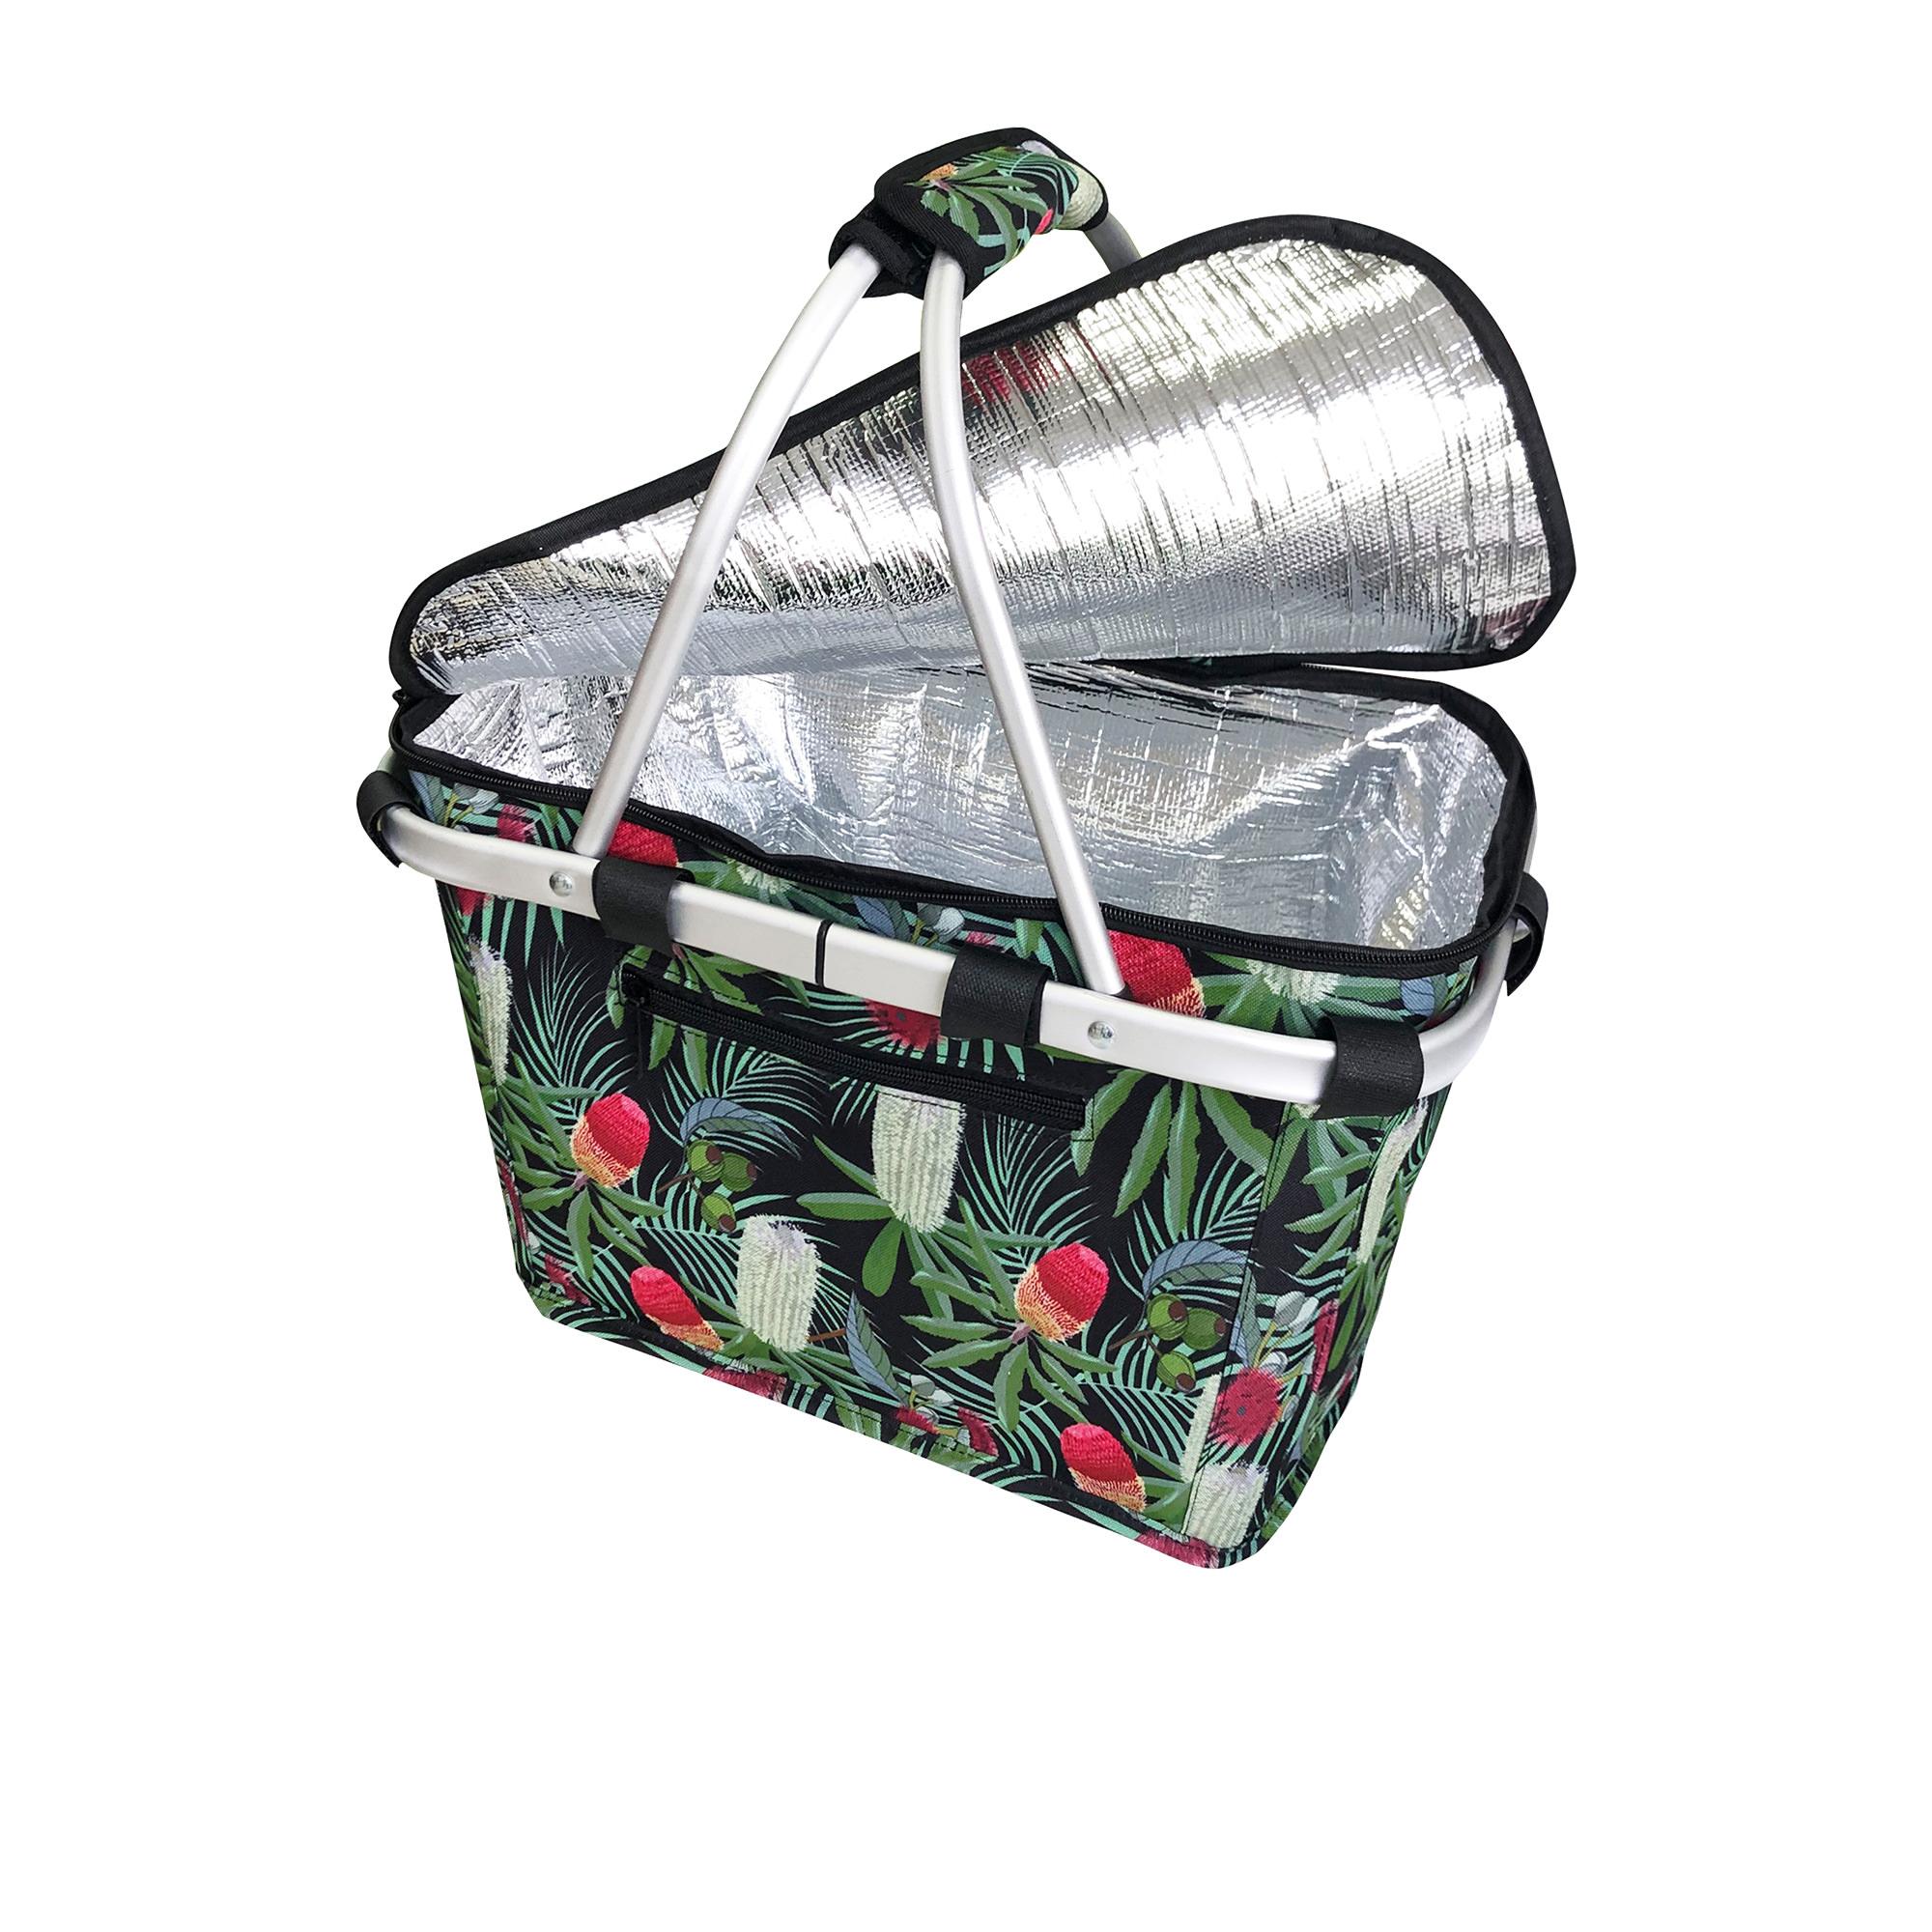 Sachi Insulated Carry Basket with Lid Banksia Image 2